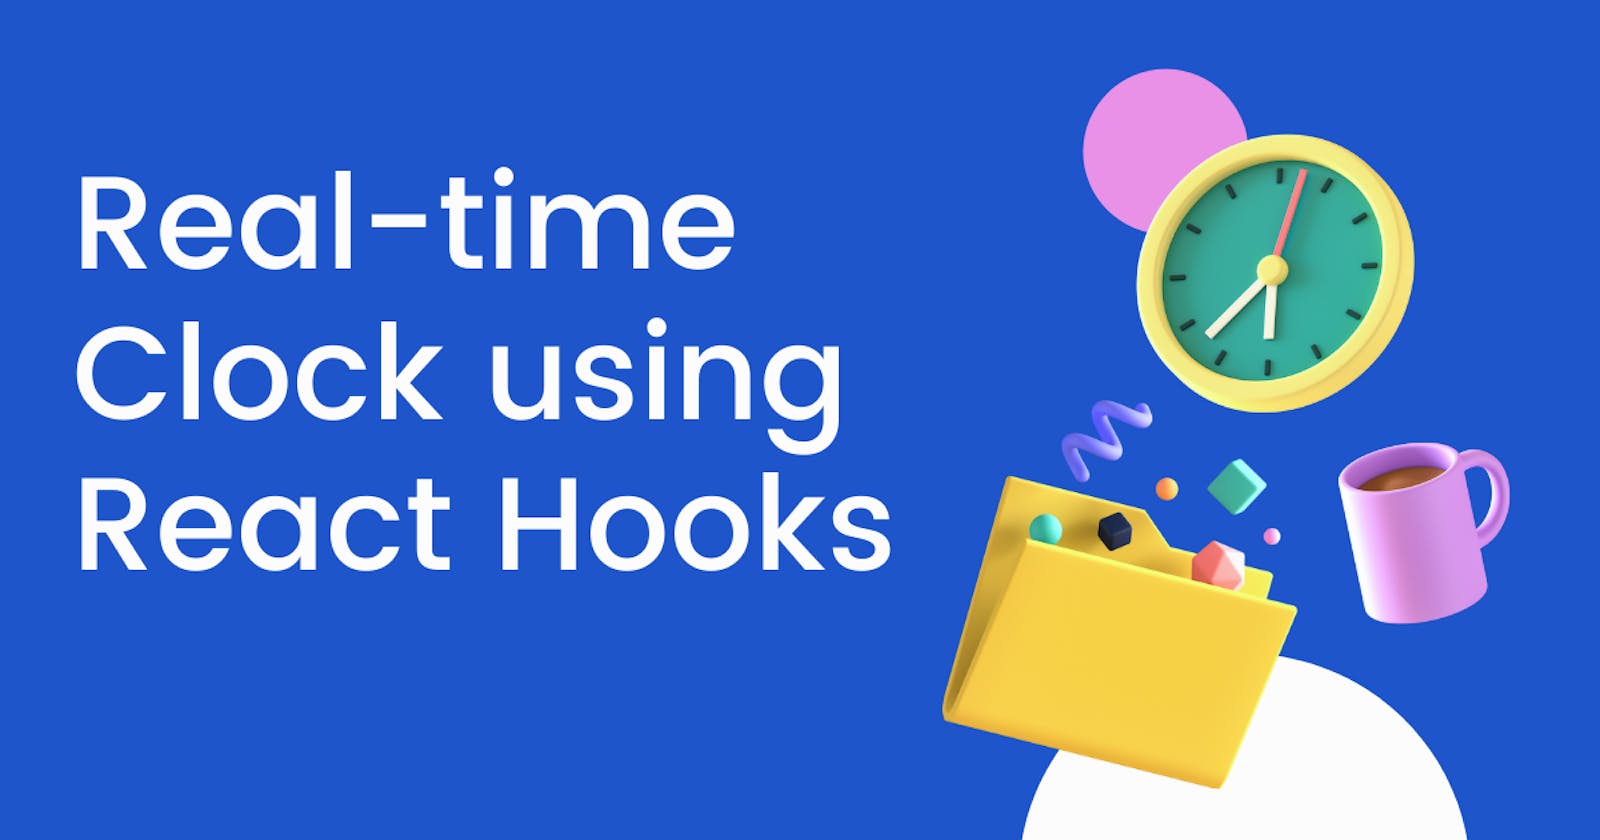 Let's build a real-time clock using React Hooks!